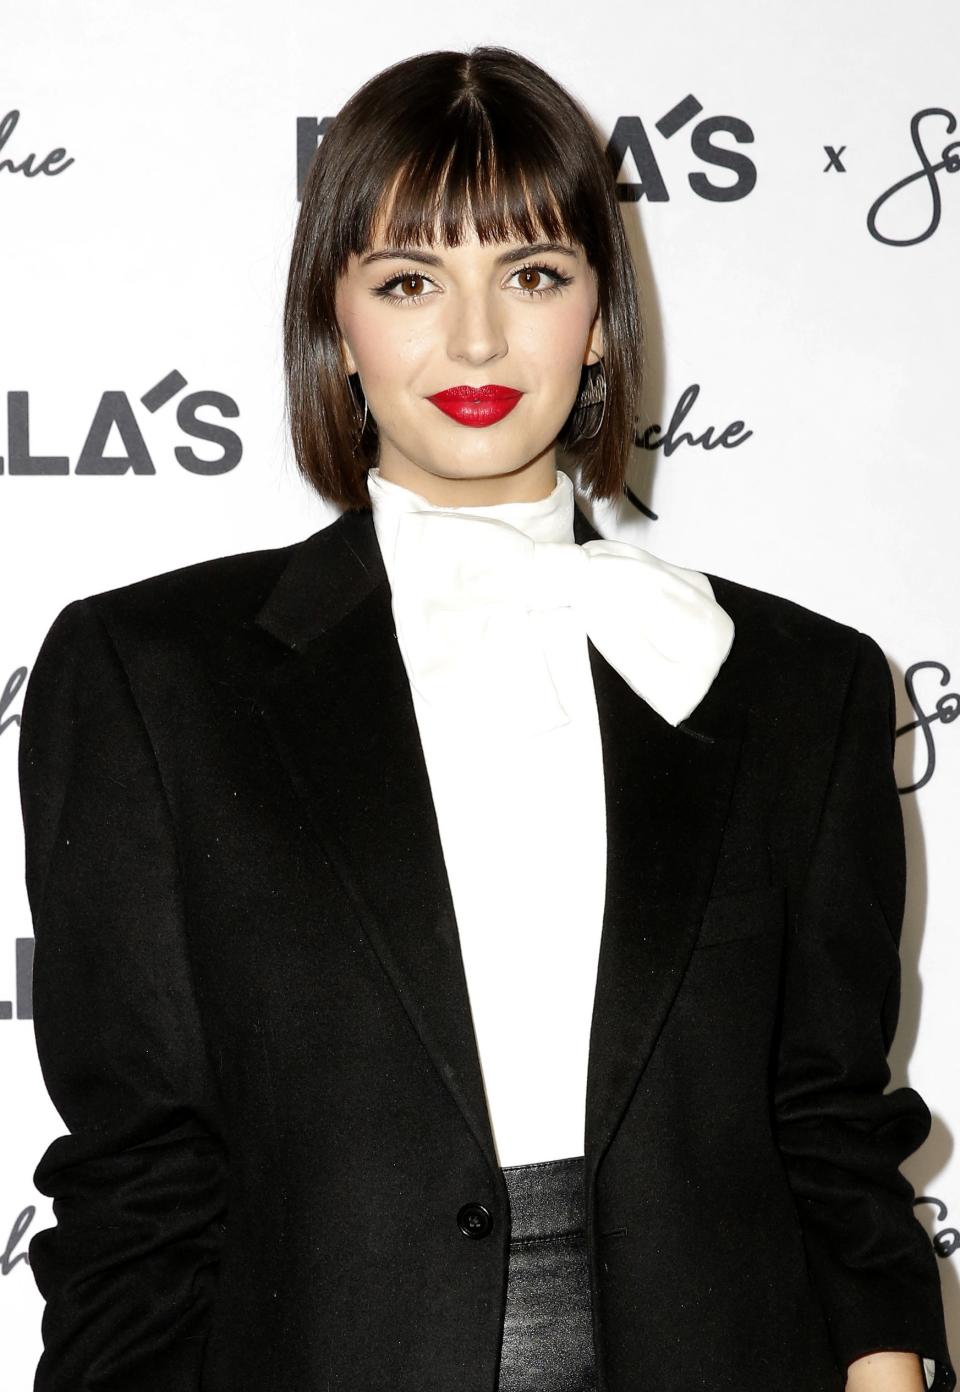 On an episode of the Dating Straight podcast, as reported in a 2020 interview with Billboard, Rebecca Black publicly came out as queer by revealing that she had recently broken up with a woman. 